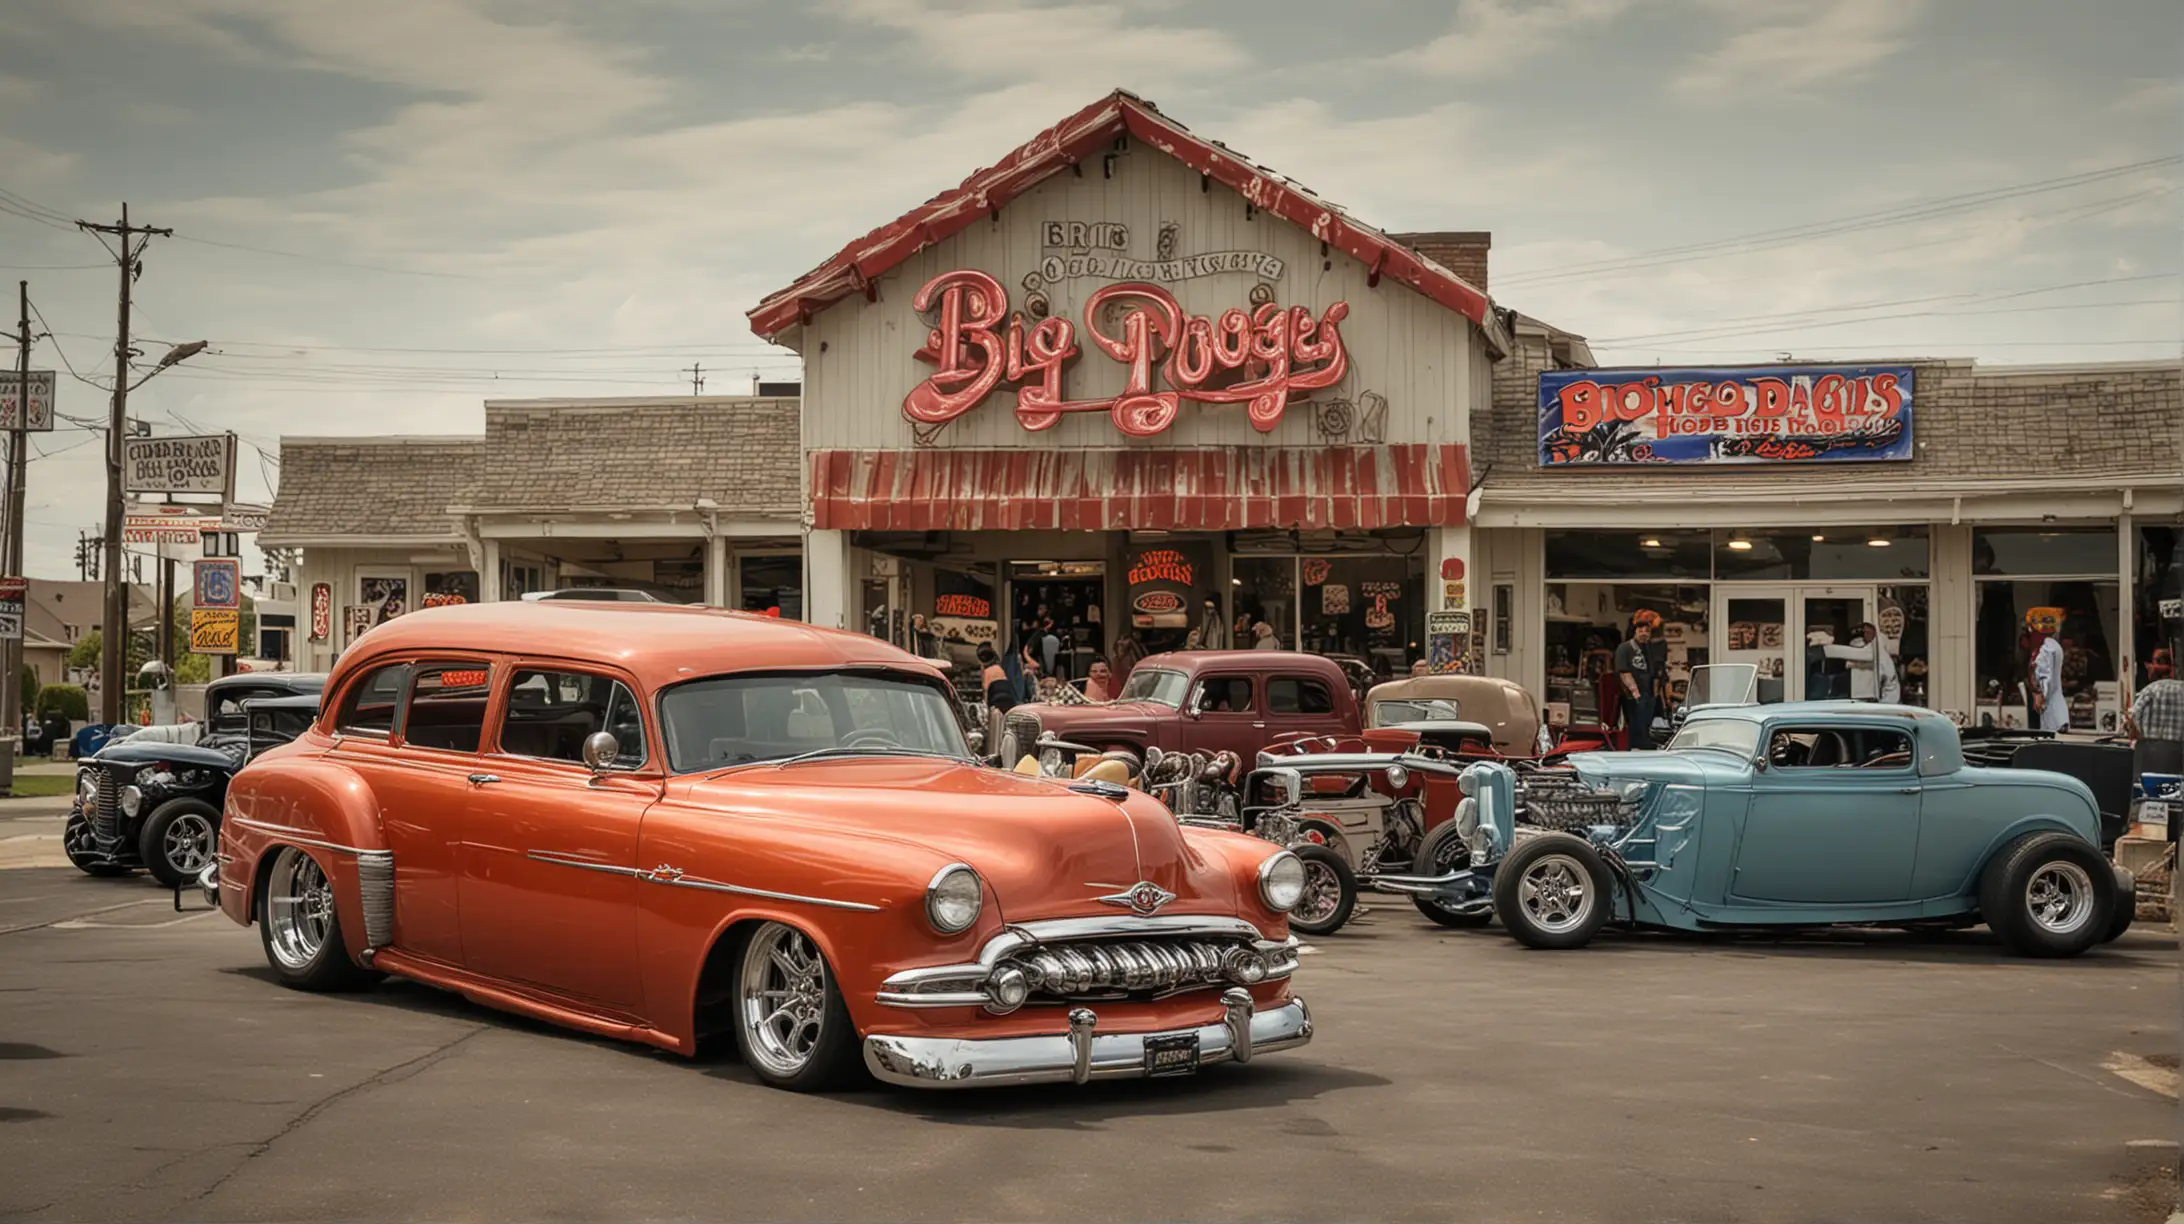 Colorful Hot Rods at Big Doggs House of Hot Rods